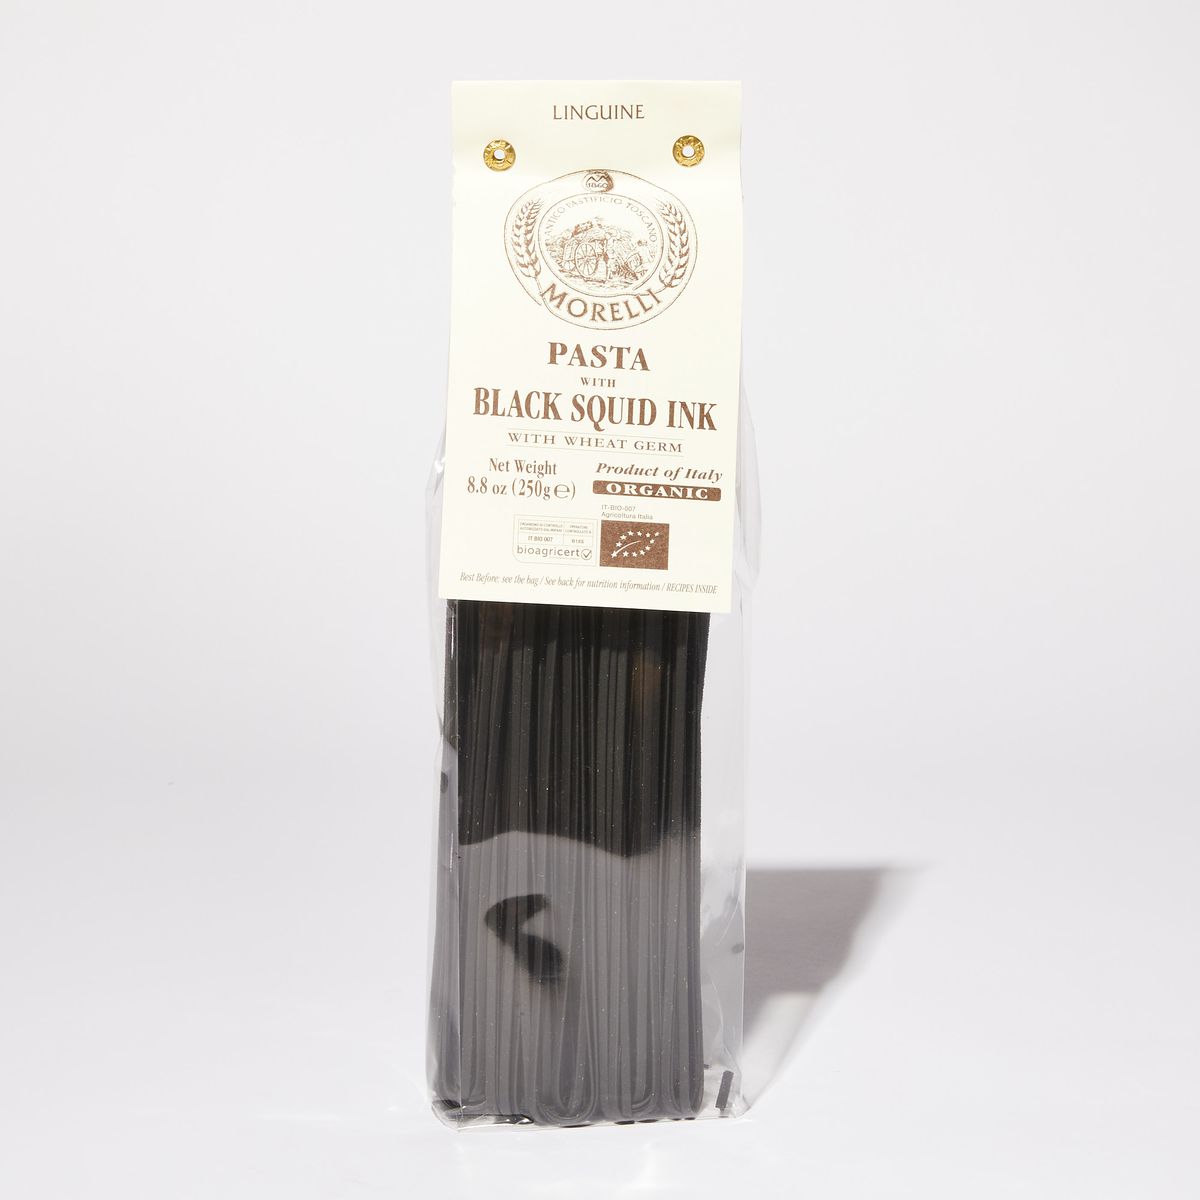 Black linguine inside a clear plastic bag with a white paper label that reads "Black Squid Ink Pasta"